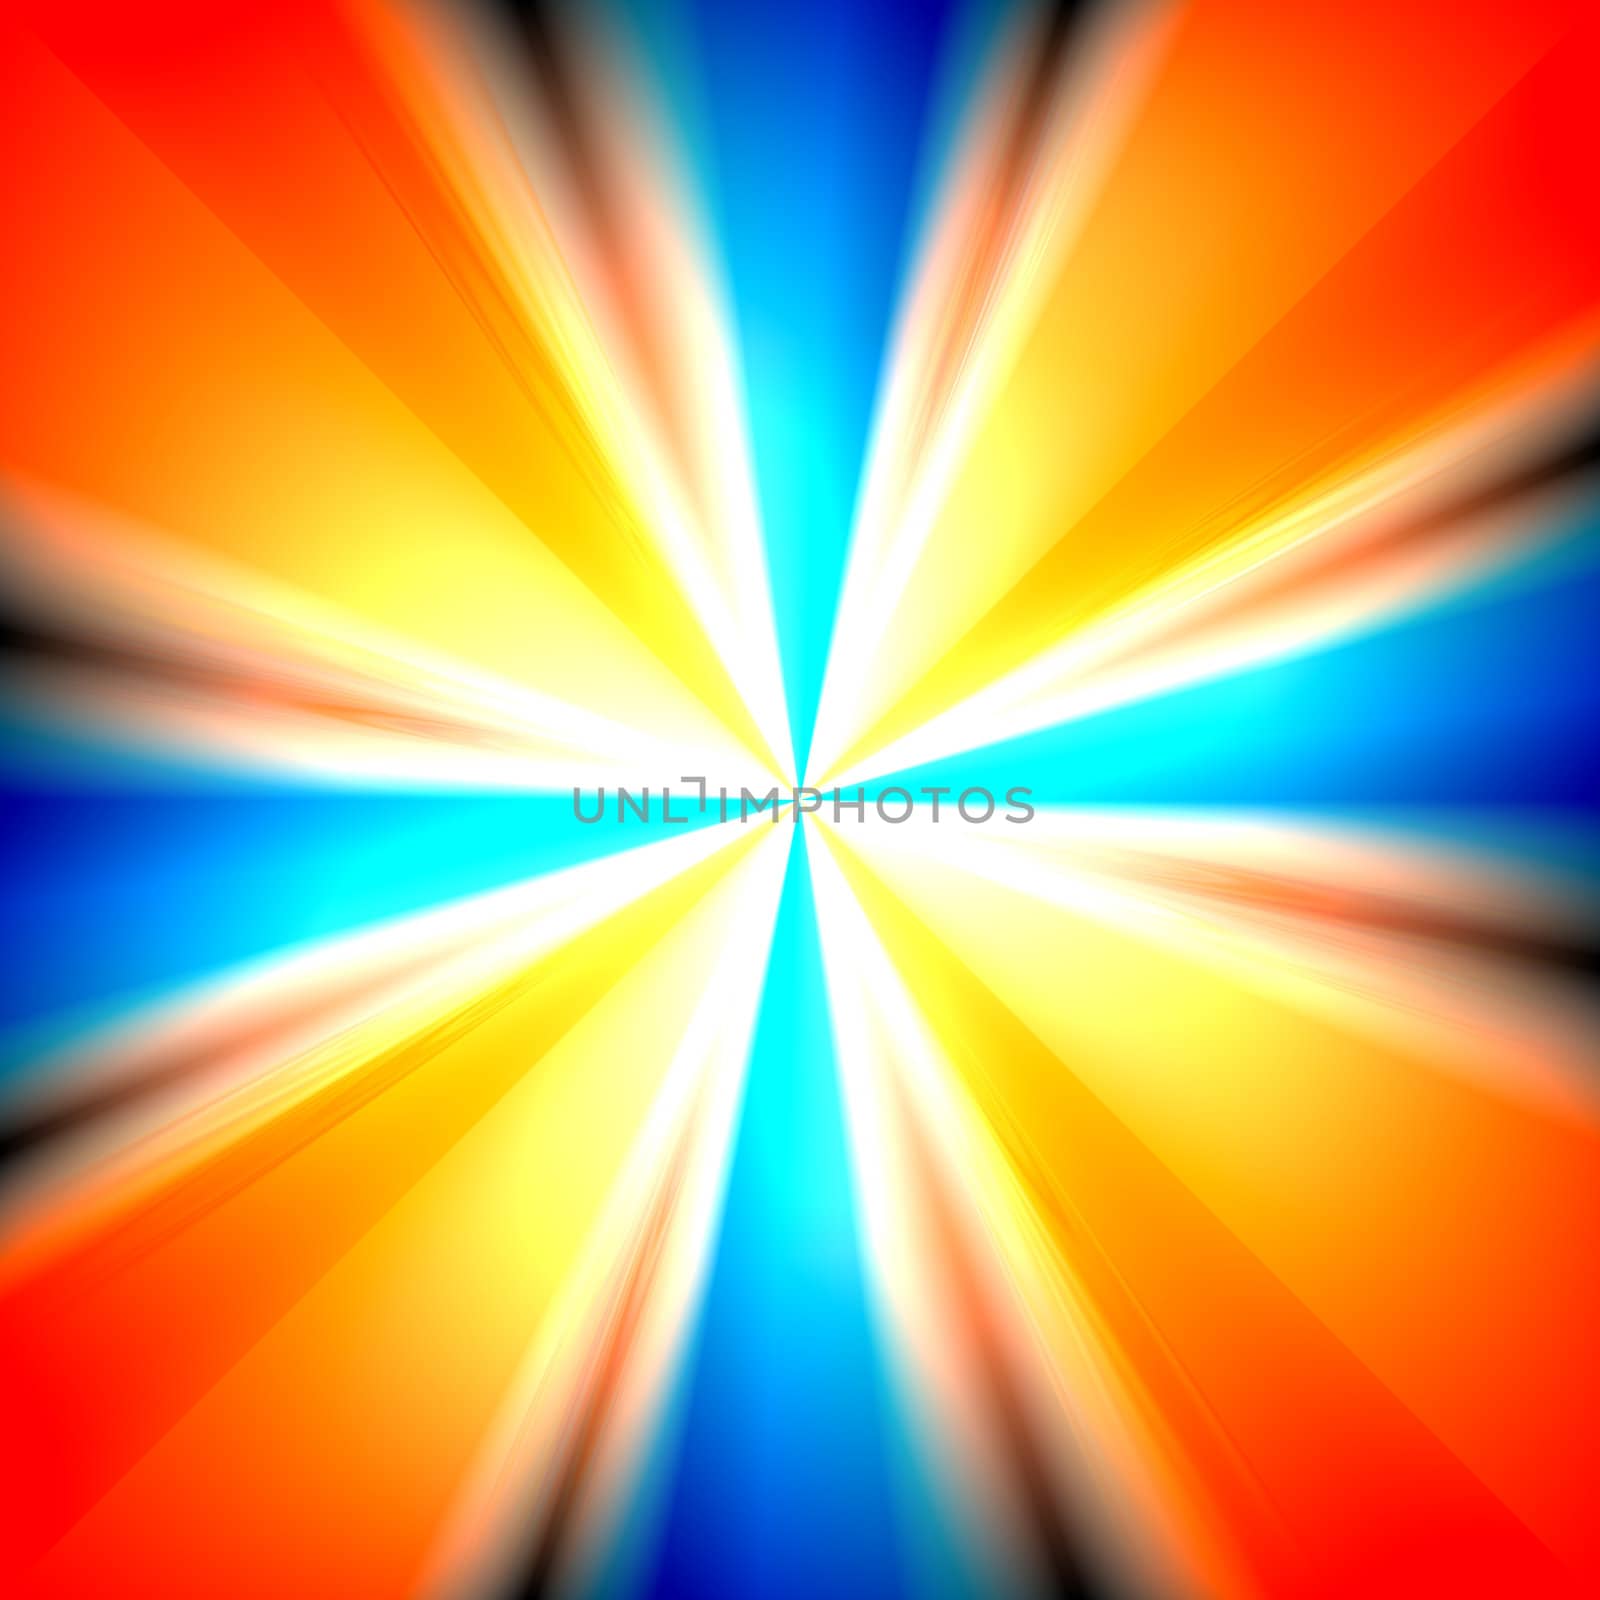 A colorful vortex background with a variety of colors.